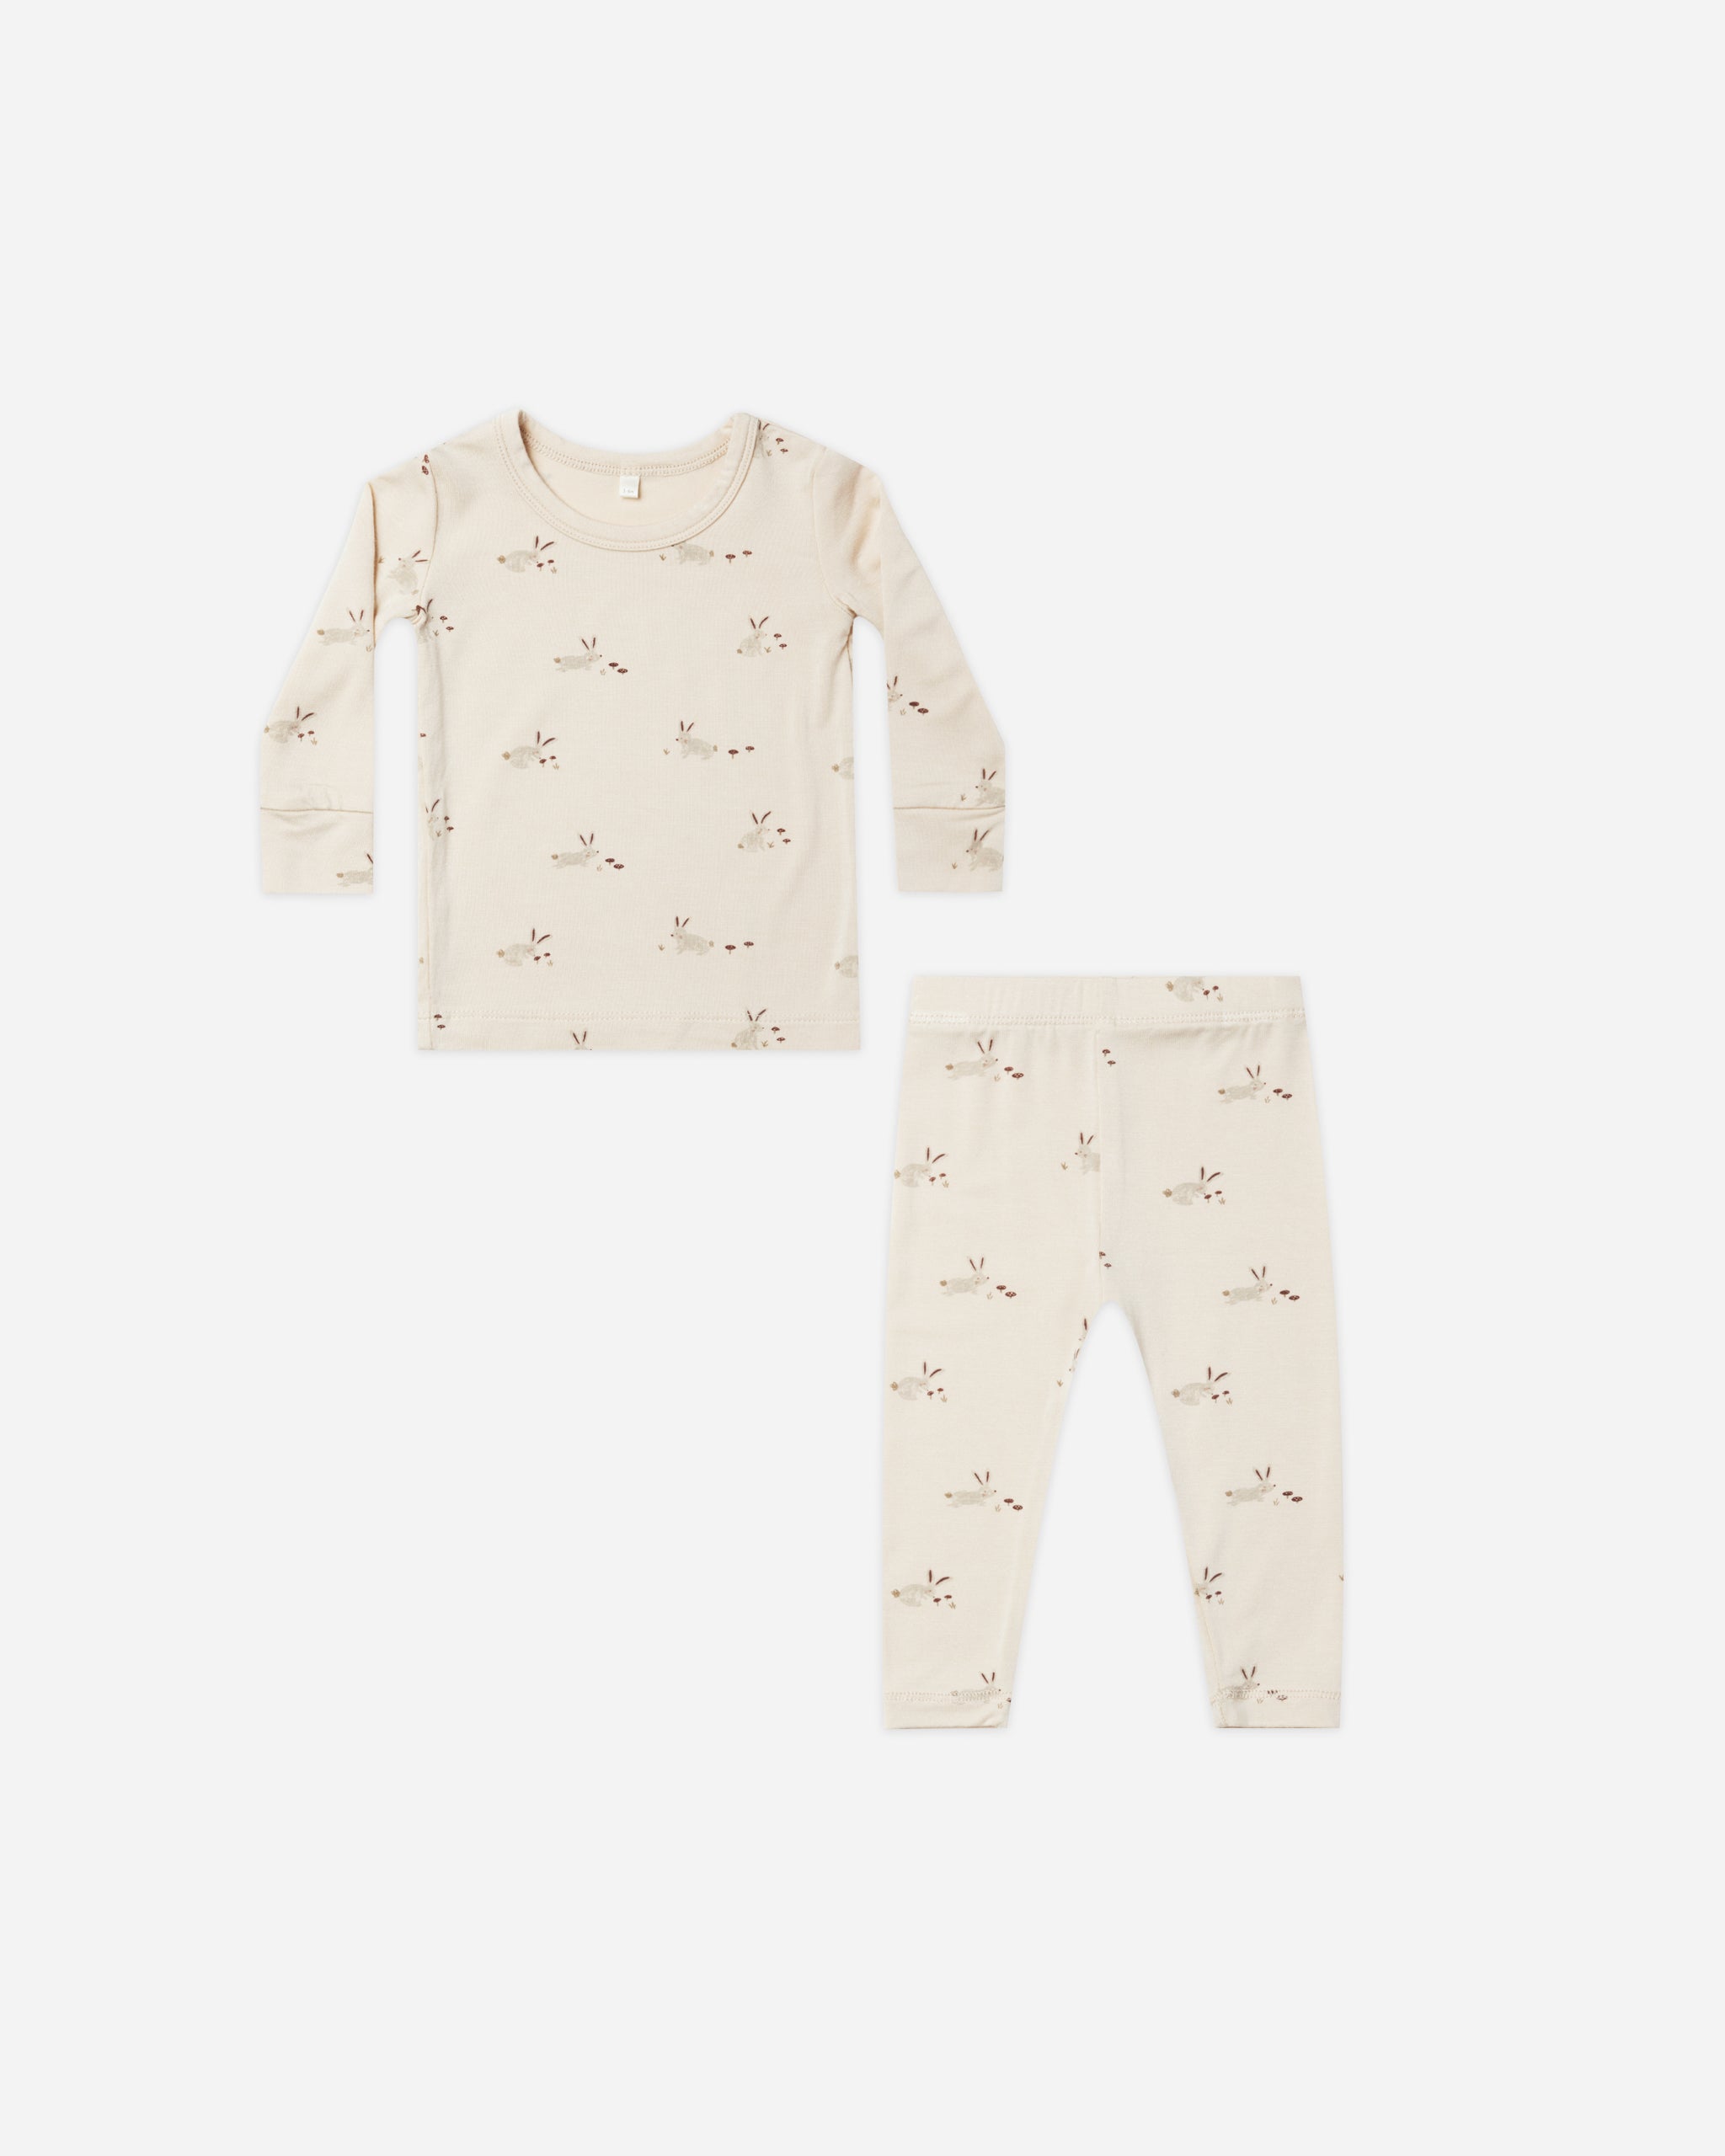 Bamboo Pajama Set || Bunnies - Rylee + Cru | Kids Clothes | Trendy Baby Clothes | Modern Infant Outfits |